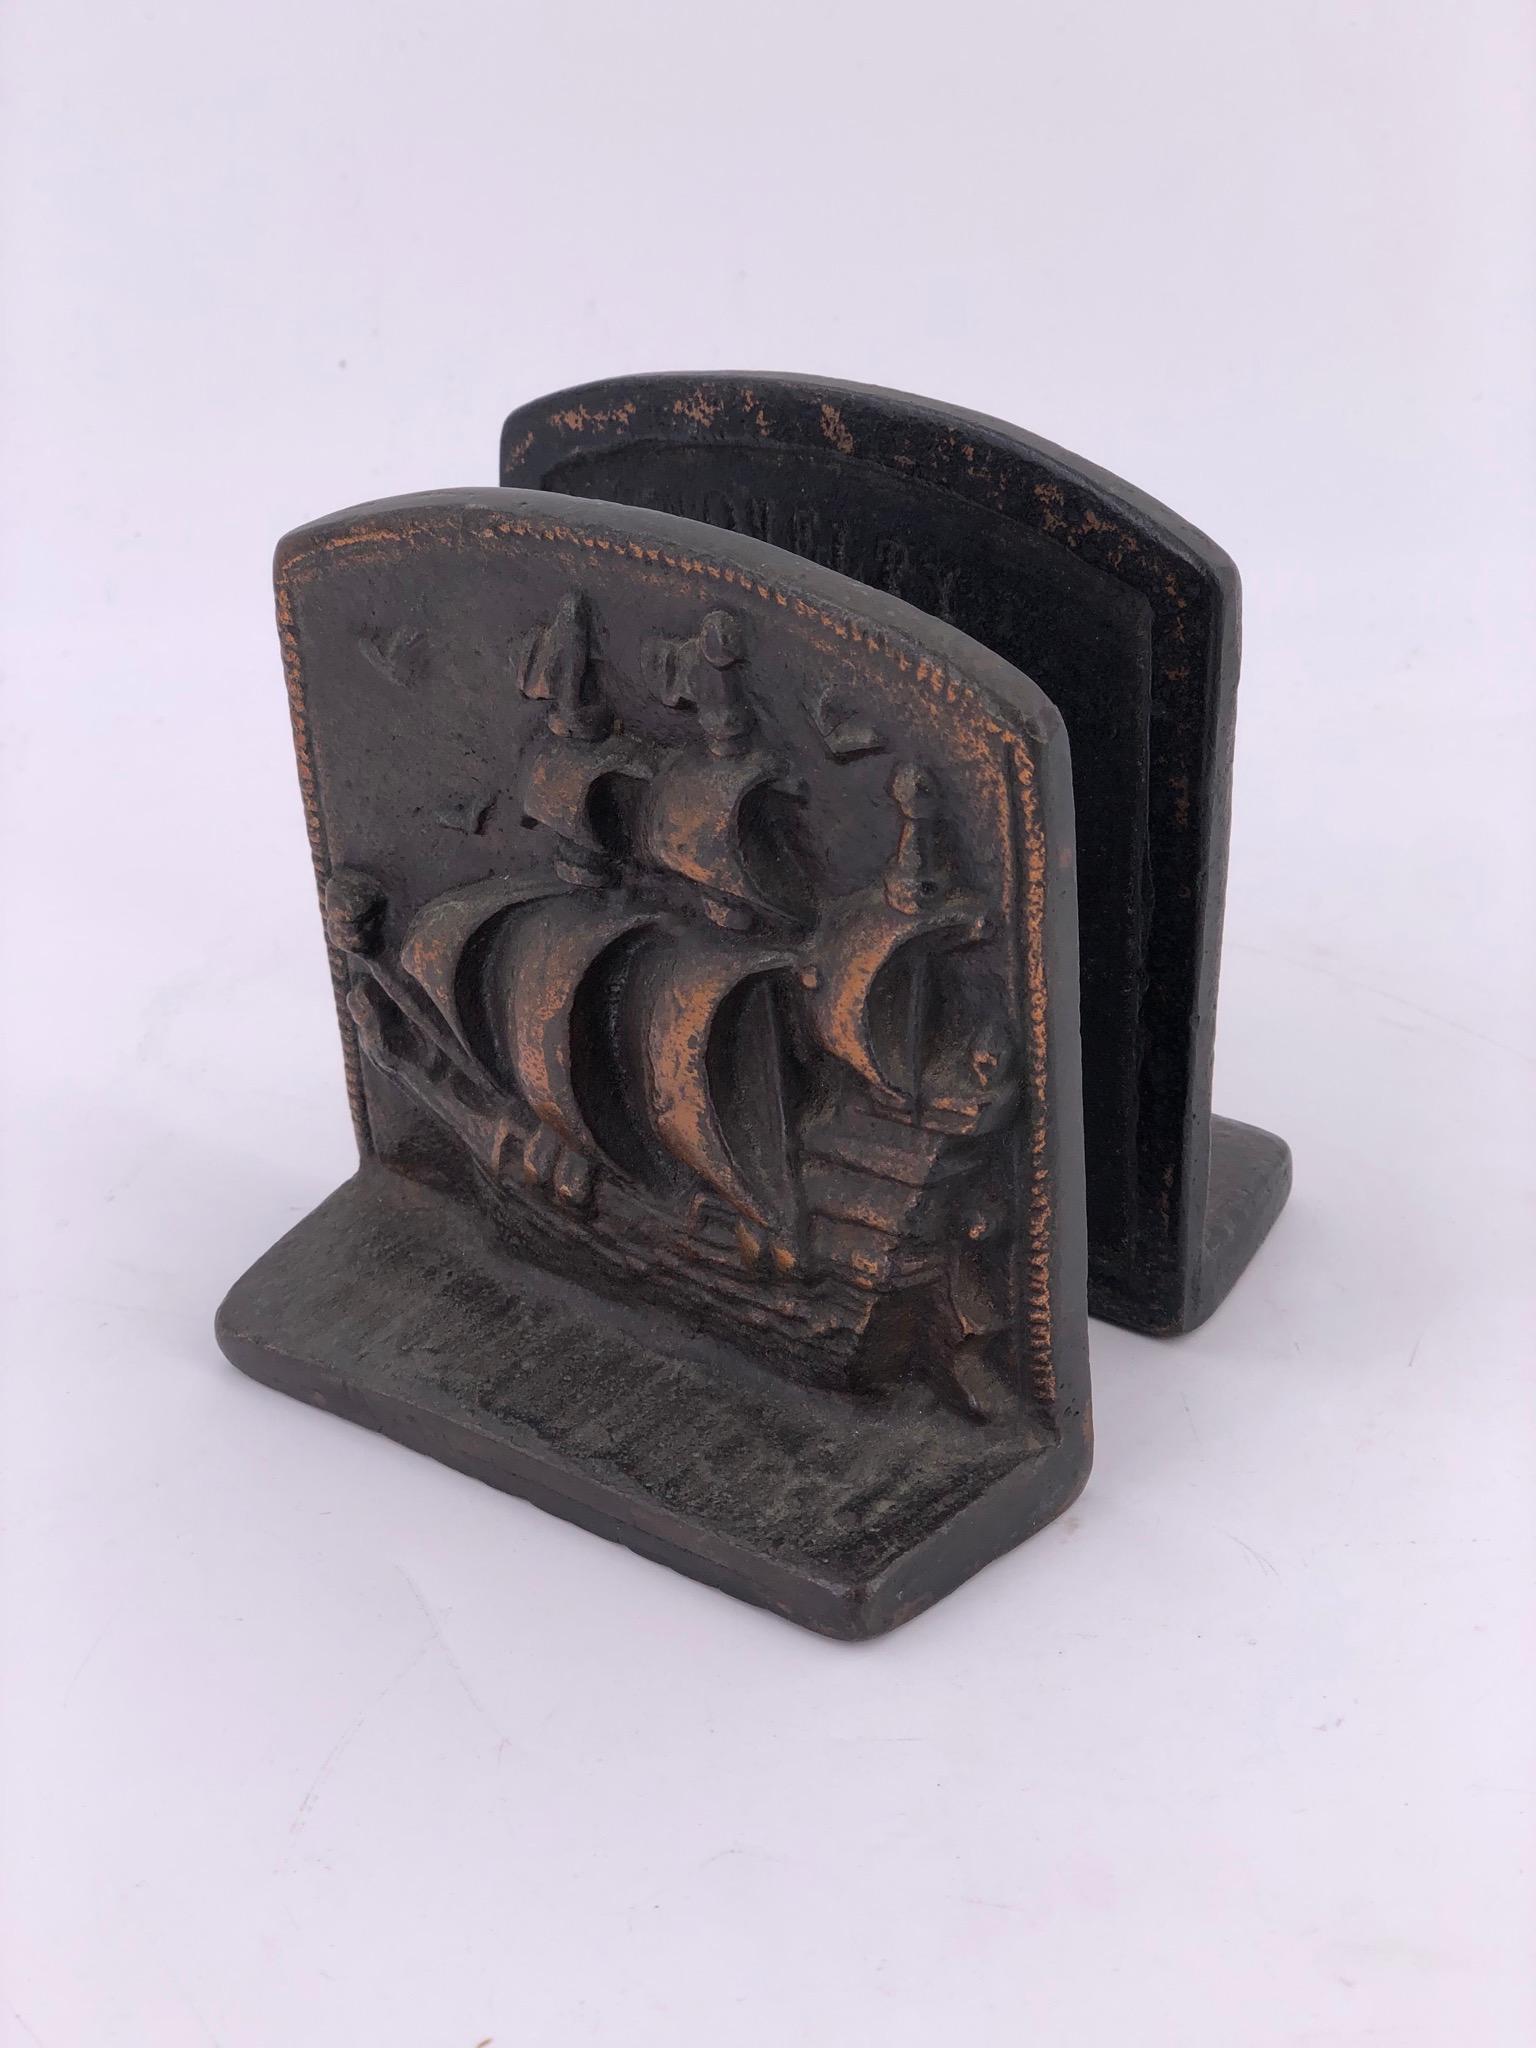 A rare pair of solid bronze bookends with a galley imprint, circa 1940s.